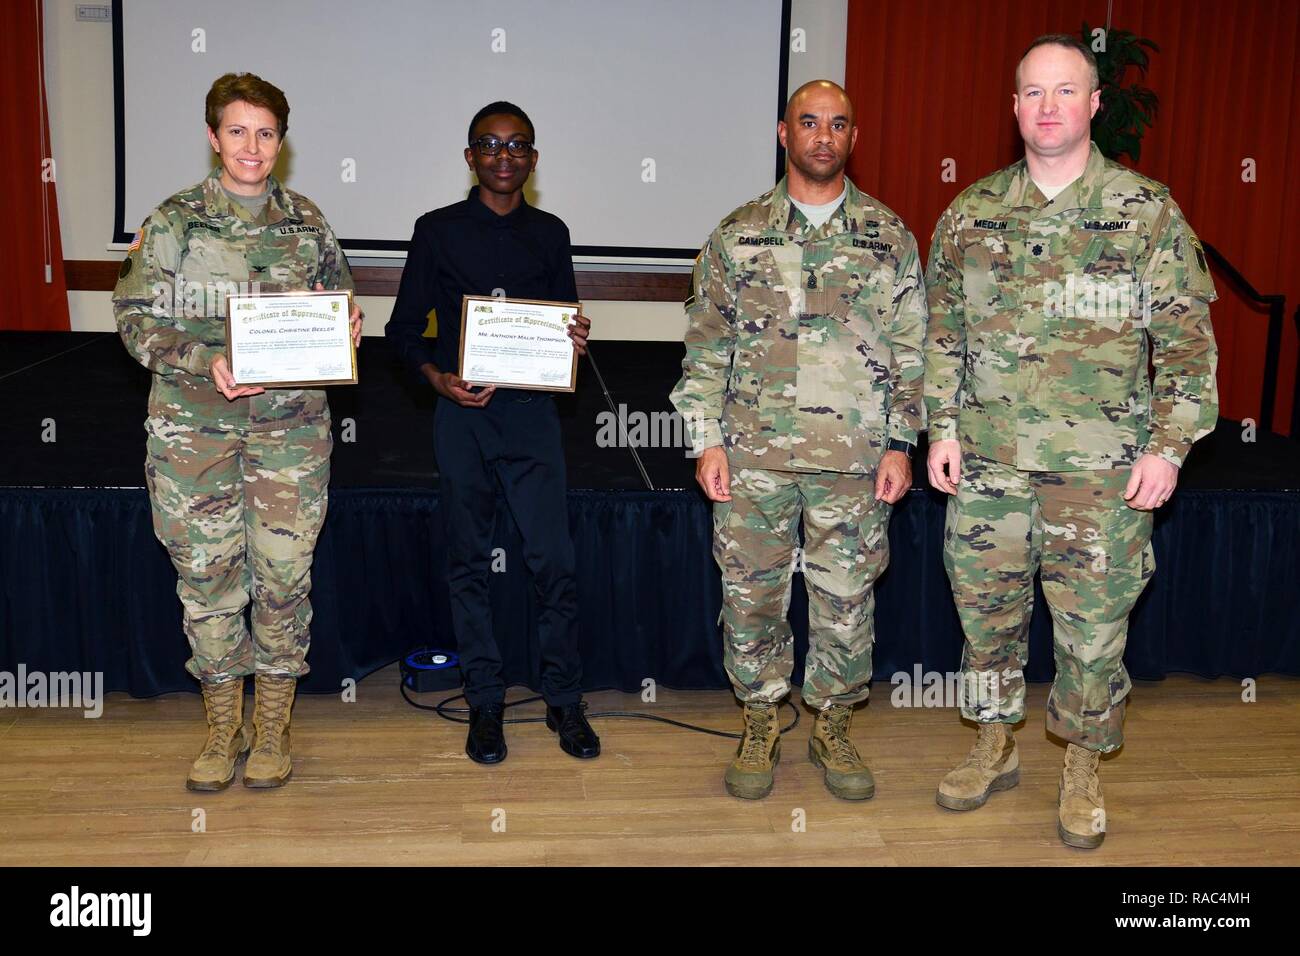 (From left), Colonel Christine A. Beeler, commander of the 414th Contracting Support Brigade, Mr. Anthony Malik Thompson of the Vicenza high school, Command Sgt. Maj. Birdel L. Campbell, Battalion Command Sergeant Major U.S. Army Africa and Lt. Col. Brett M. Medlin, Battalion Commander U.S. Army Africa, pose for a photo during award appreciation for Martin Luther King, Jr. Day, at Vicenza Military Community’s 2017 Observance Ceremony at Caserma Ederle, Vicenza, Italy, Jan. 10, 2017. Stock Photo